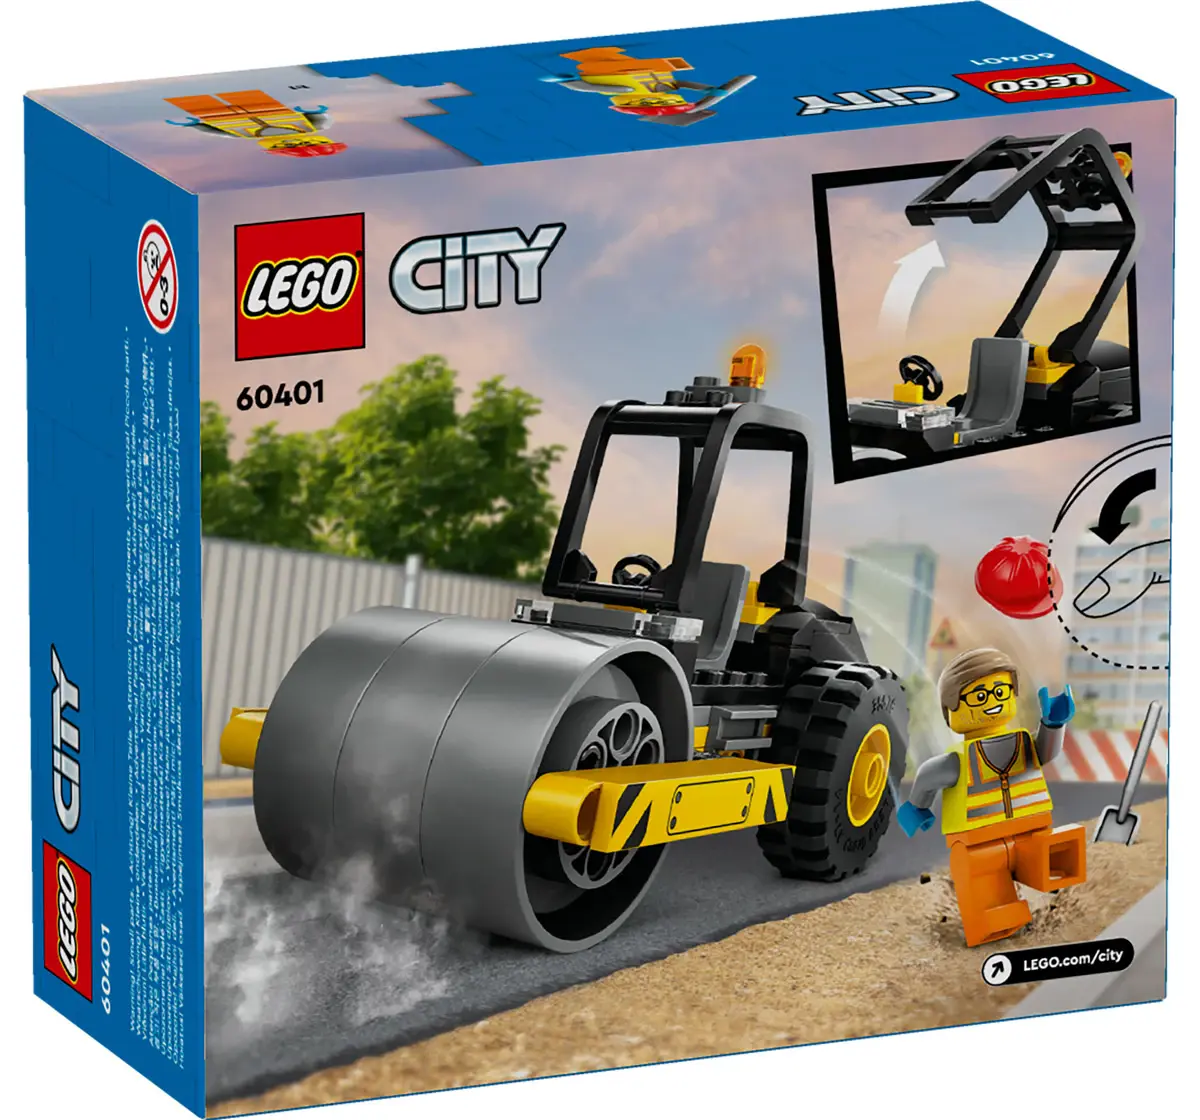 Lego City Construction Steamroller Toy 60401 Multicolour For Kids Ages 5Y+ (78 Pieces)